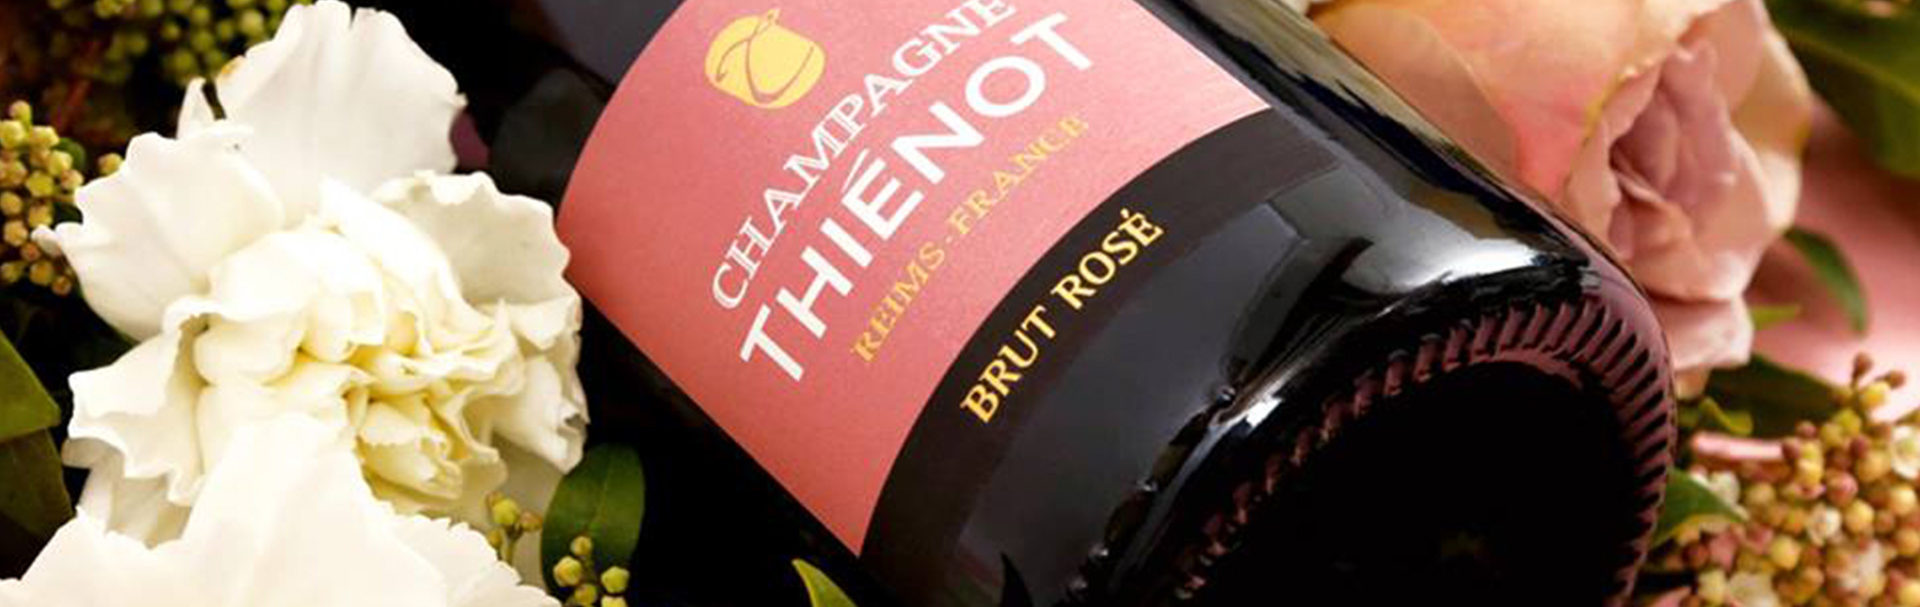 The Tannin Level House Champagne: Thienot – Champagne of the Oscars!